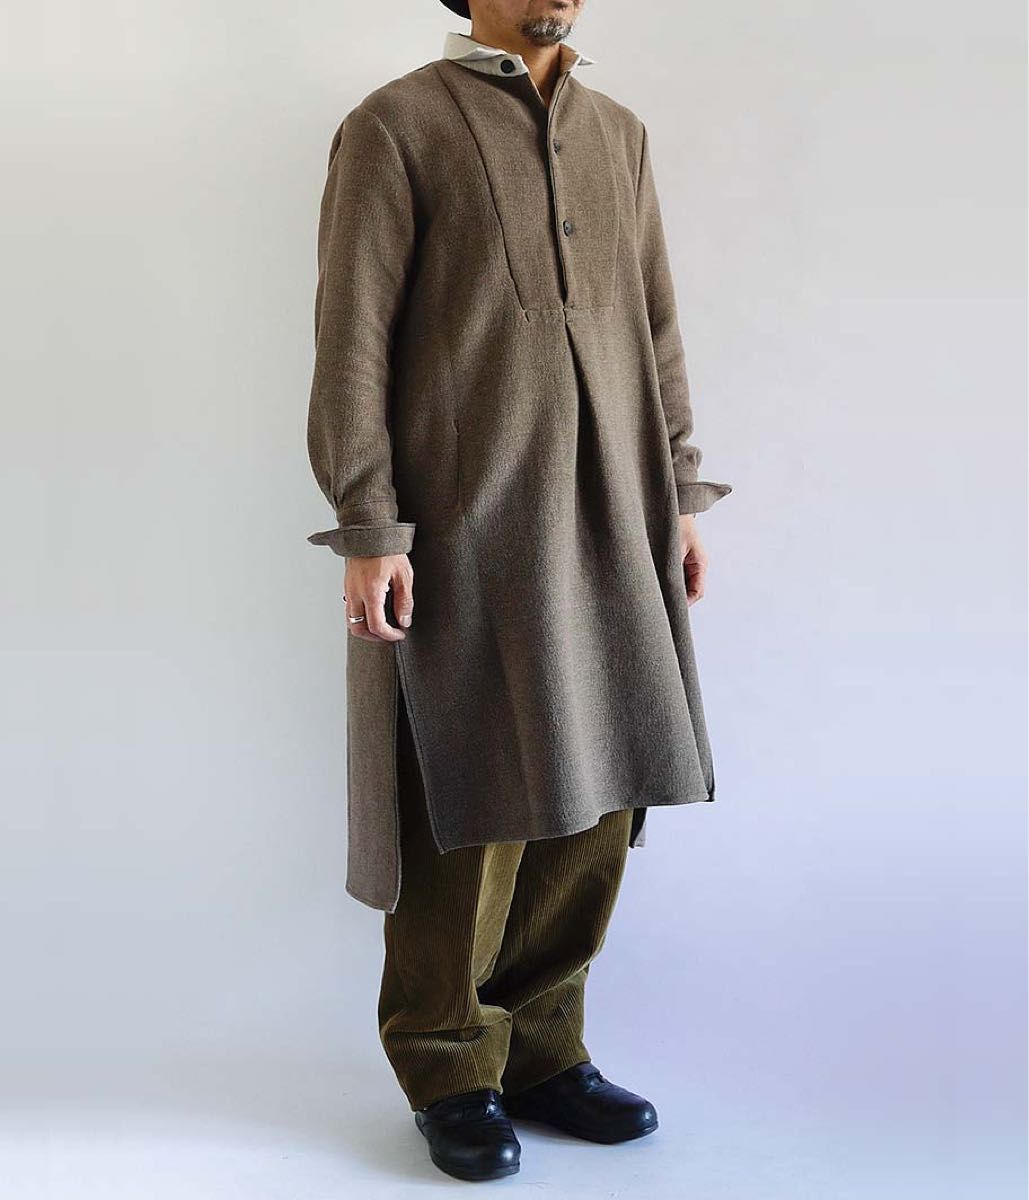 21AW sus-sous Long Smock Brown Beige 7 イギリス軍 フレンチヴィンテージ 古着 スモック